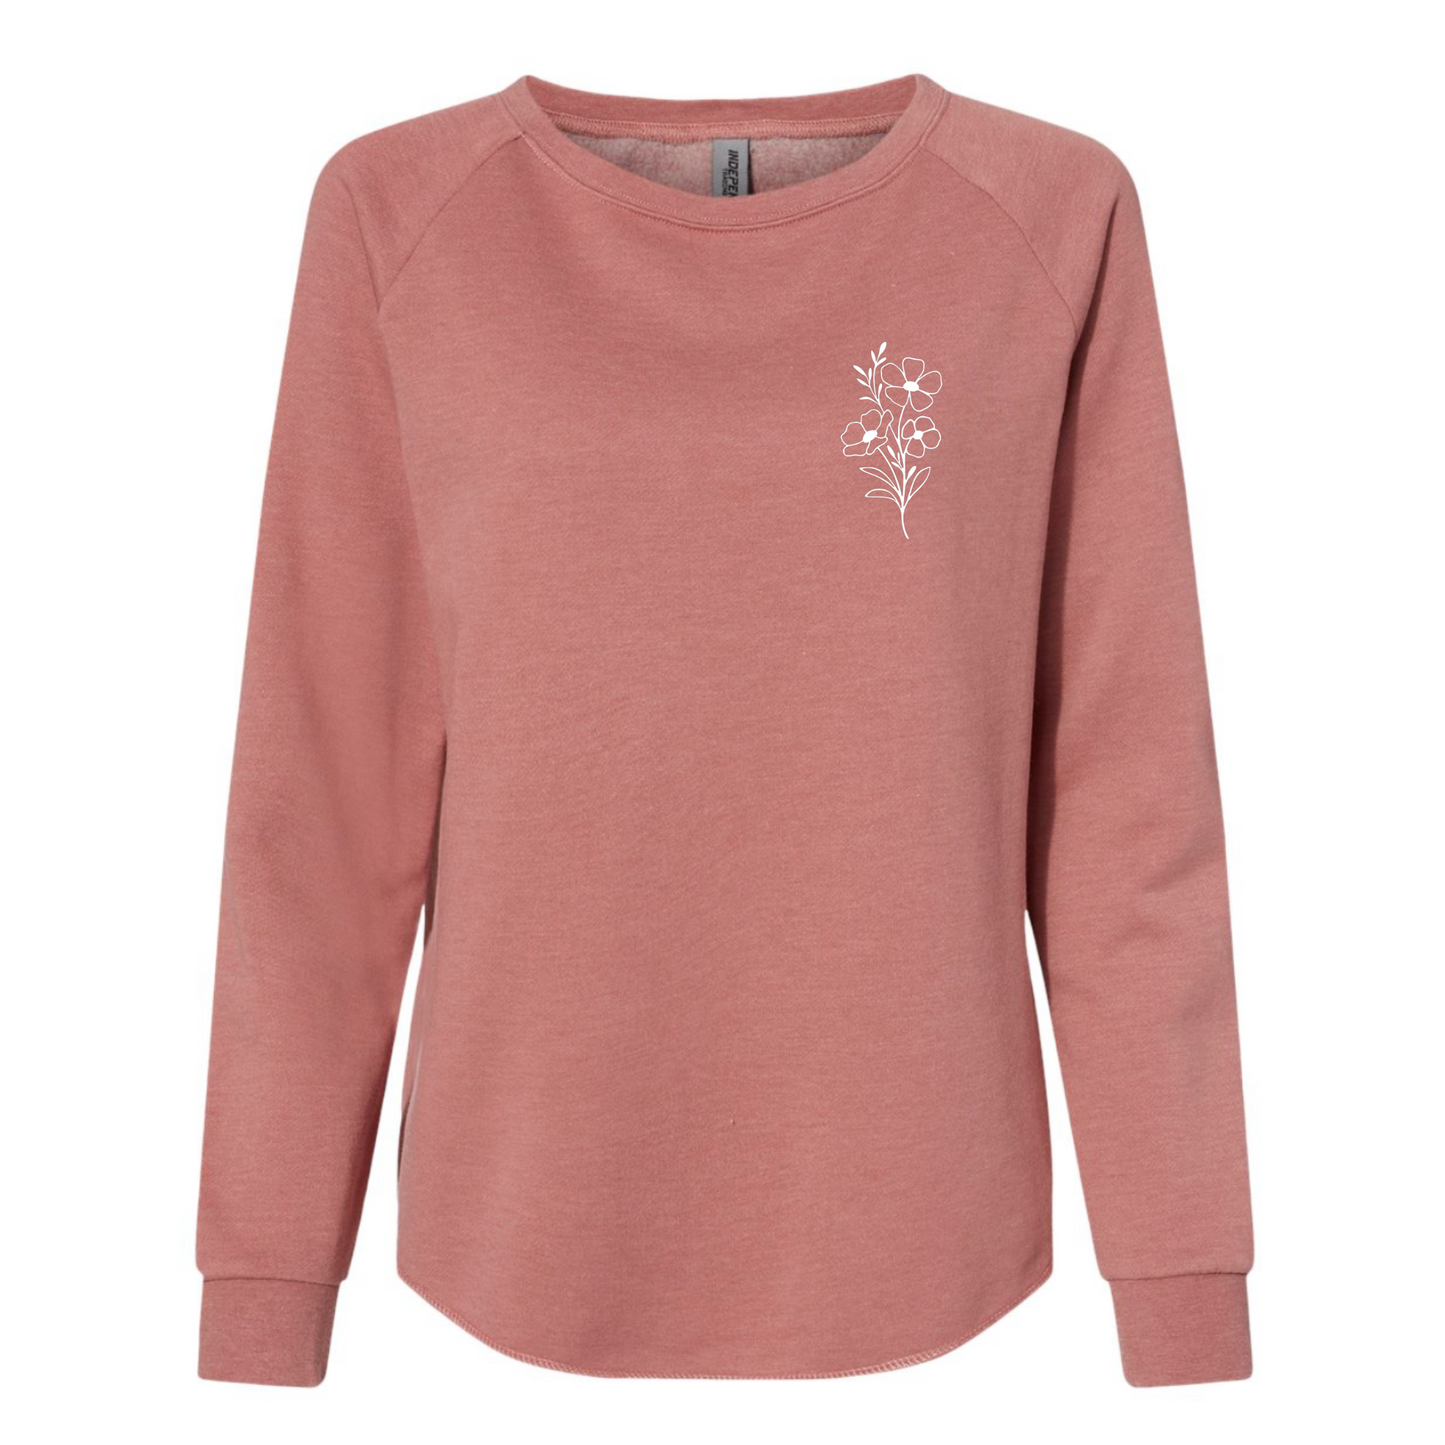 Front view of the dusty rose sweatshirt with white flower emblem